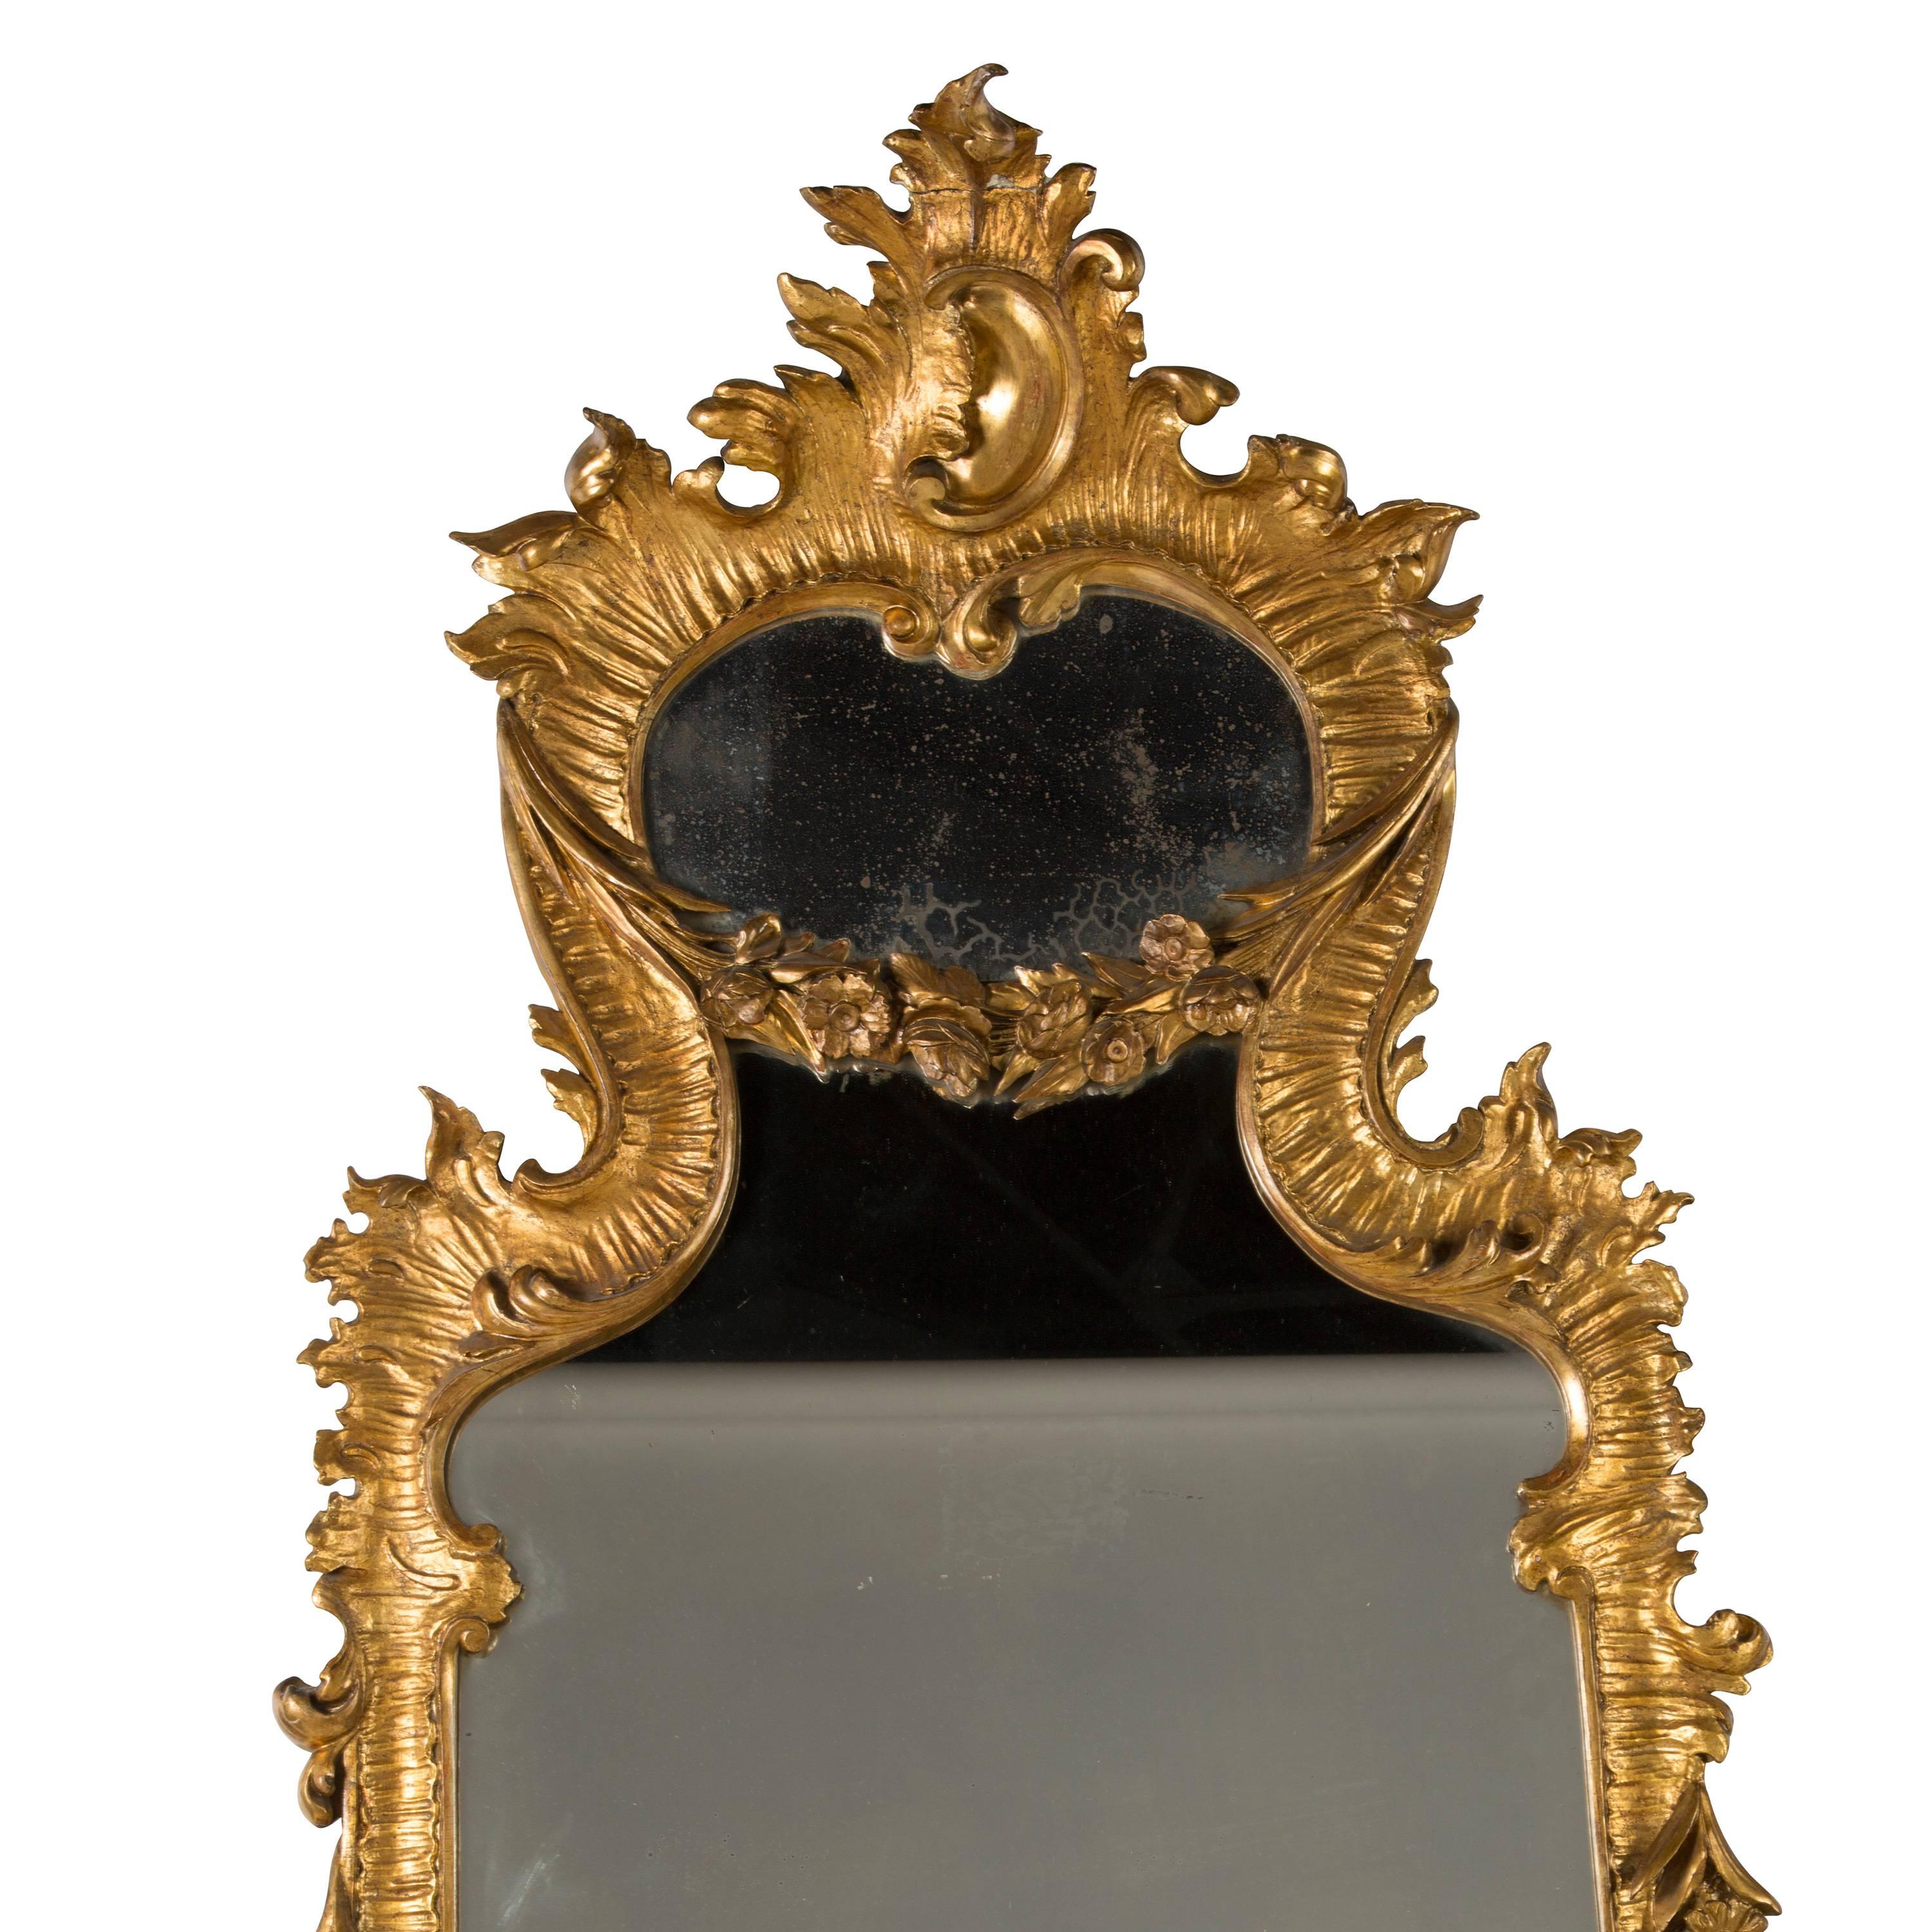 A stunning large early 19th century Italian carved wood and gilt mirror in rococo style, circa 1800-1820.